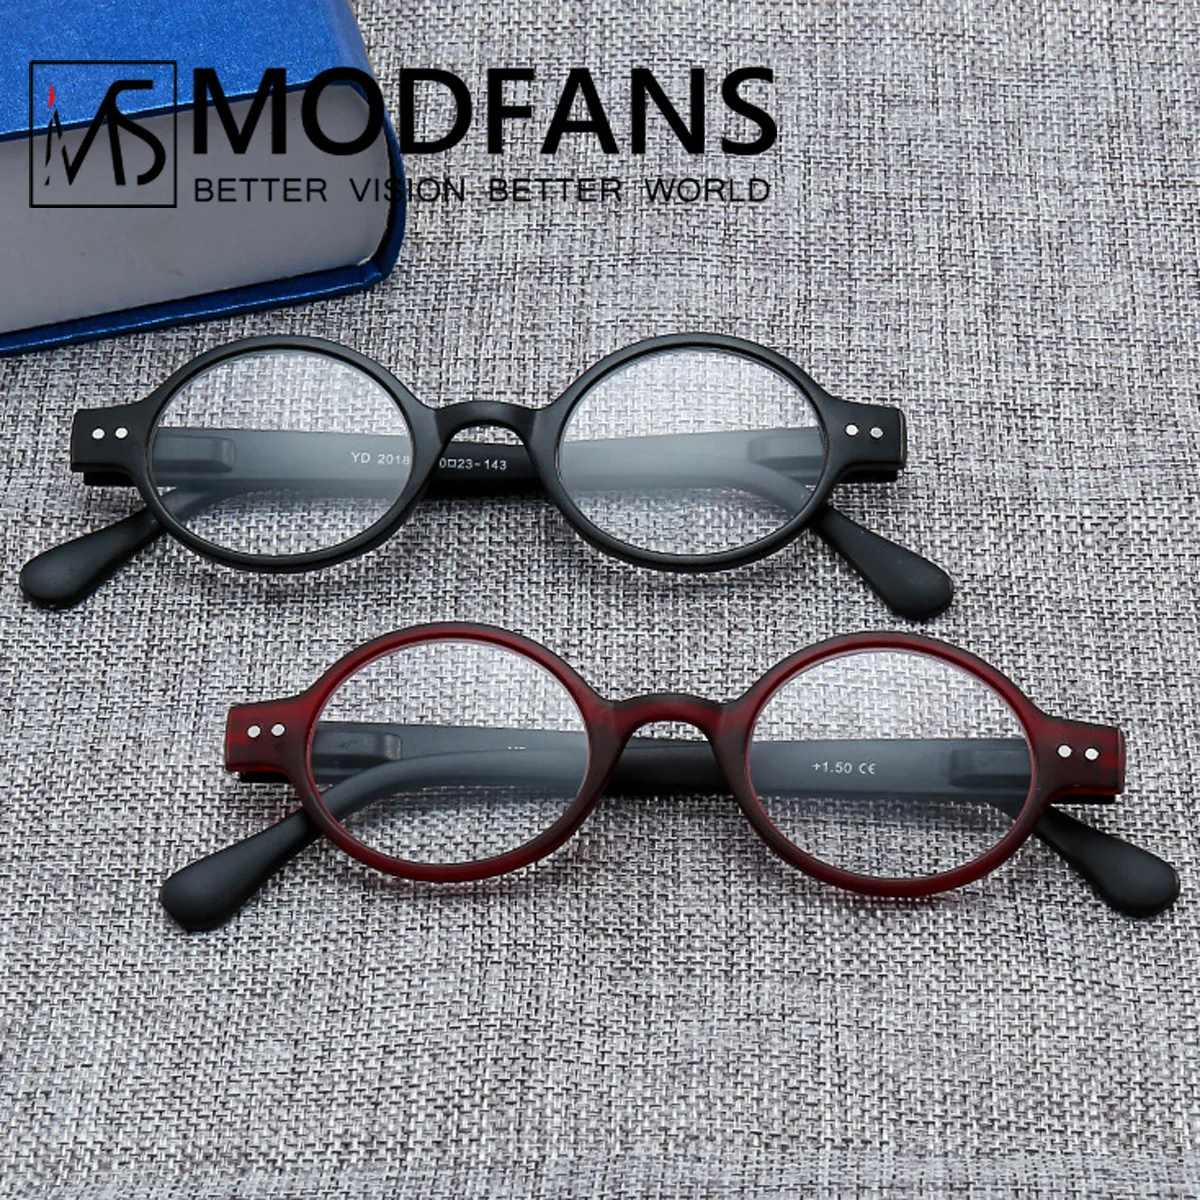 Read Eyeglass Men Women Round Vintage Reading Glasses Light Weight With Spring Hinge Easy To Carry  +1 +1.5 +2 +2.5 +3 +3.5|Women